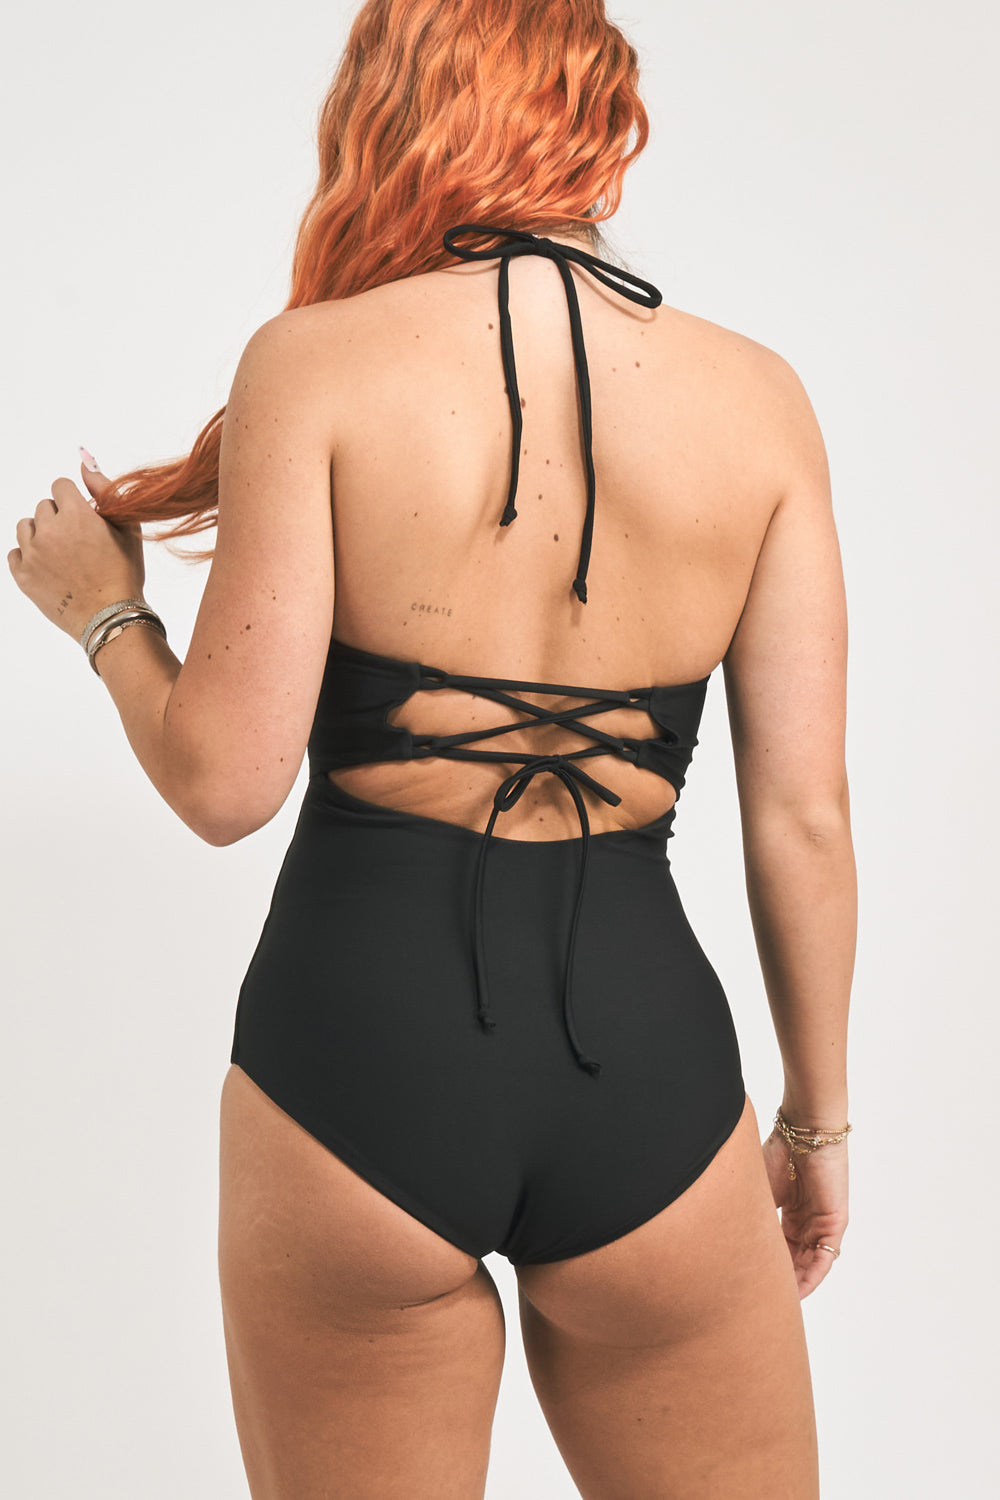 Black Performance - Bralette One Piece w/ Extra Coverage Bottoms - Exoticathletica